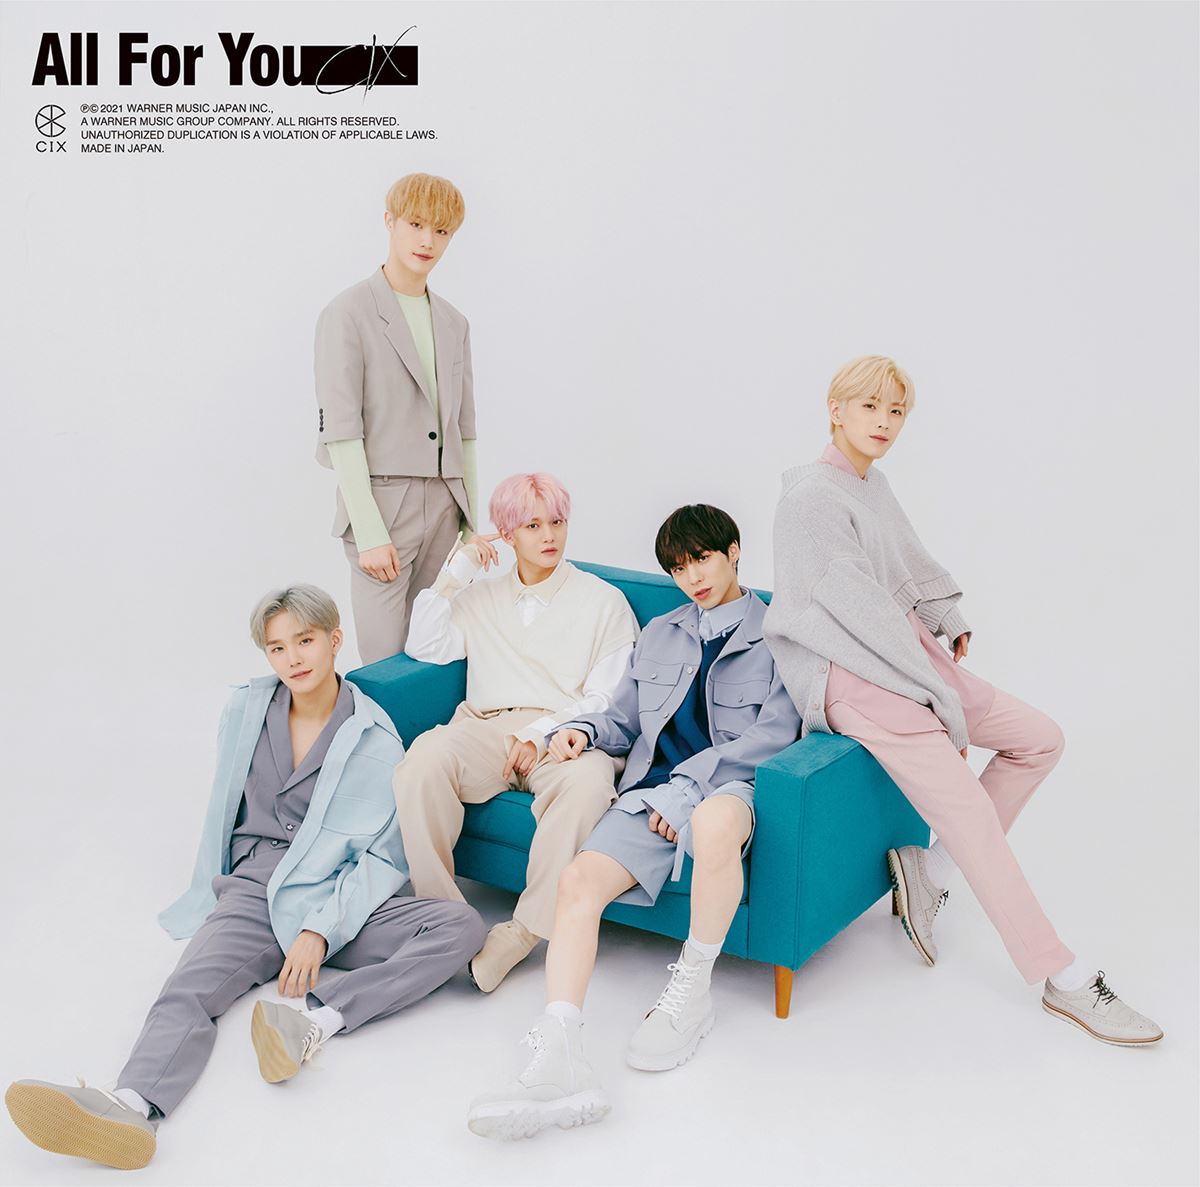 CIX『All For You』通常盤B ジャケット